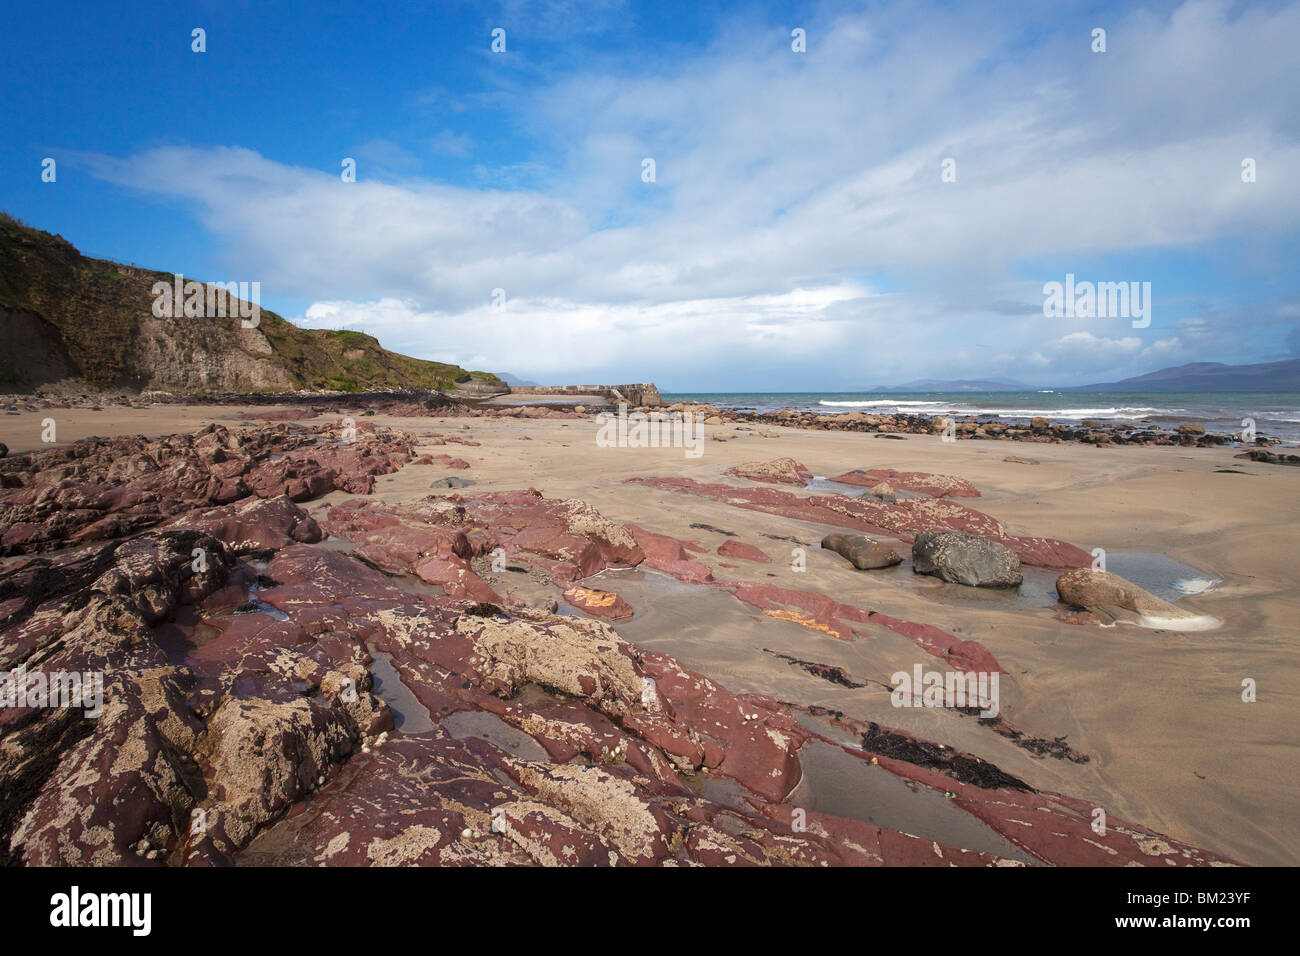 Rock formations on the beach, Louisburgh, County Mayo, Republic of Ireland Stock Photo